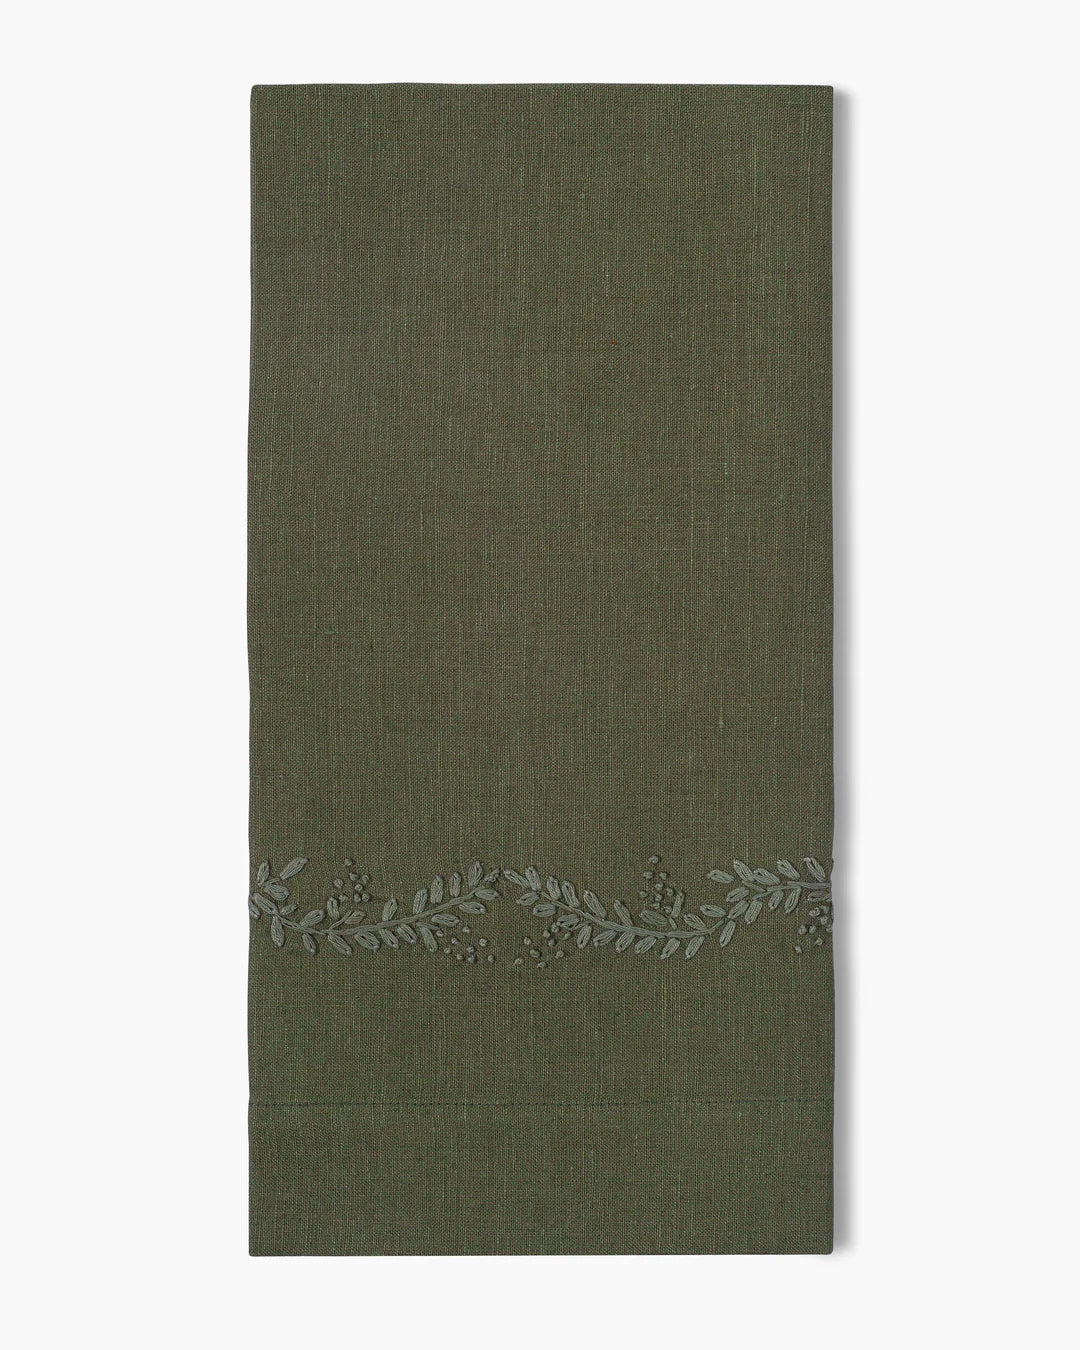 Prism Vine Linen Hand Towels in Pewter, Set of Two